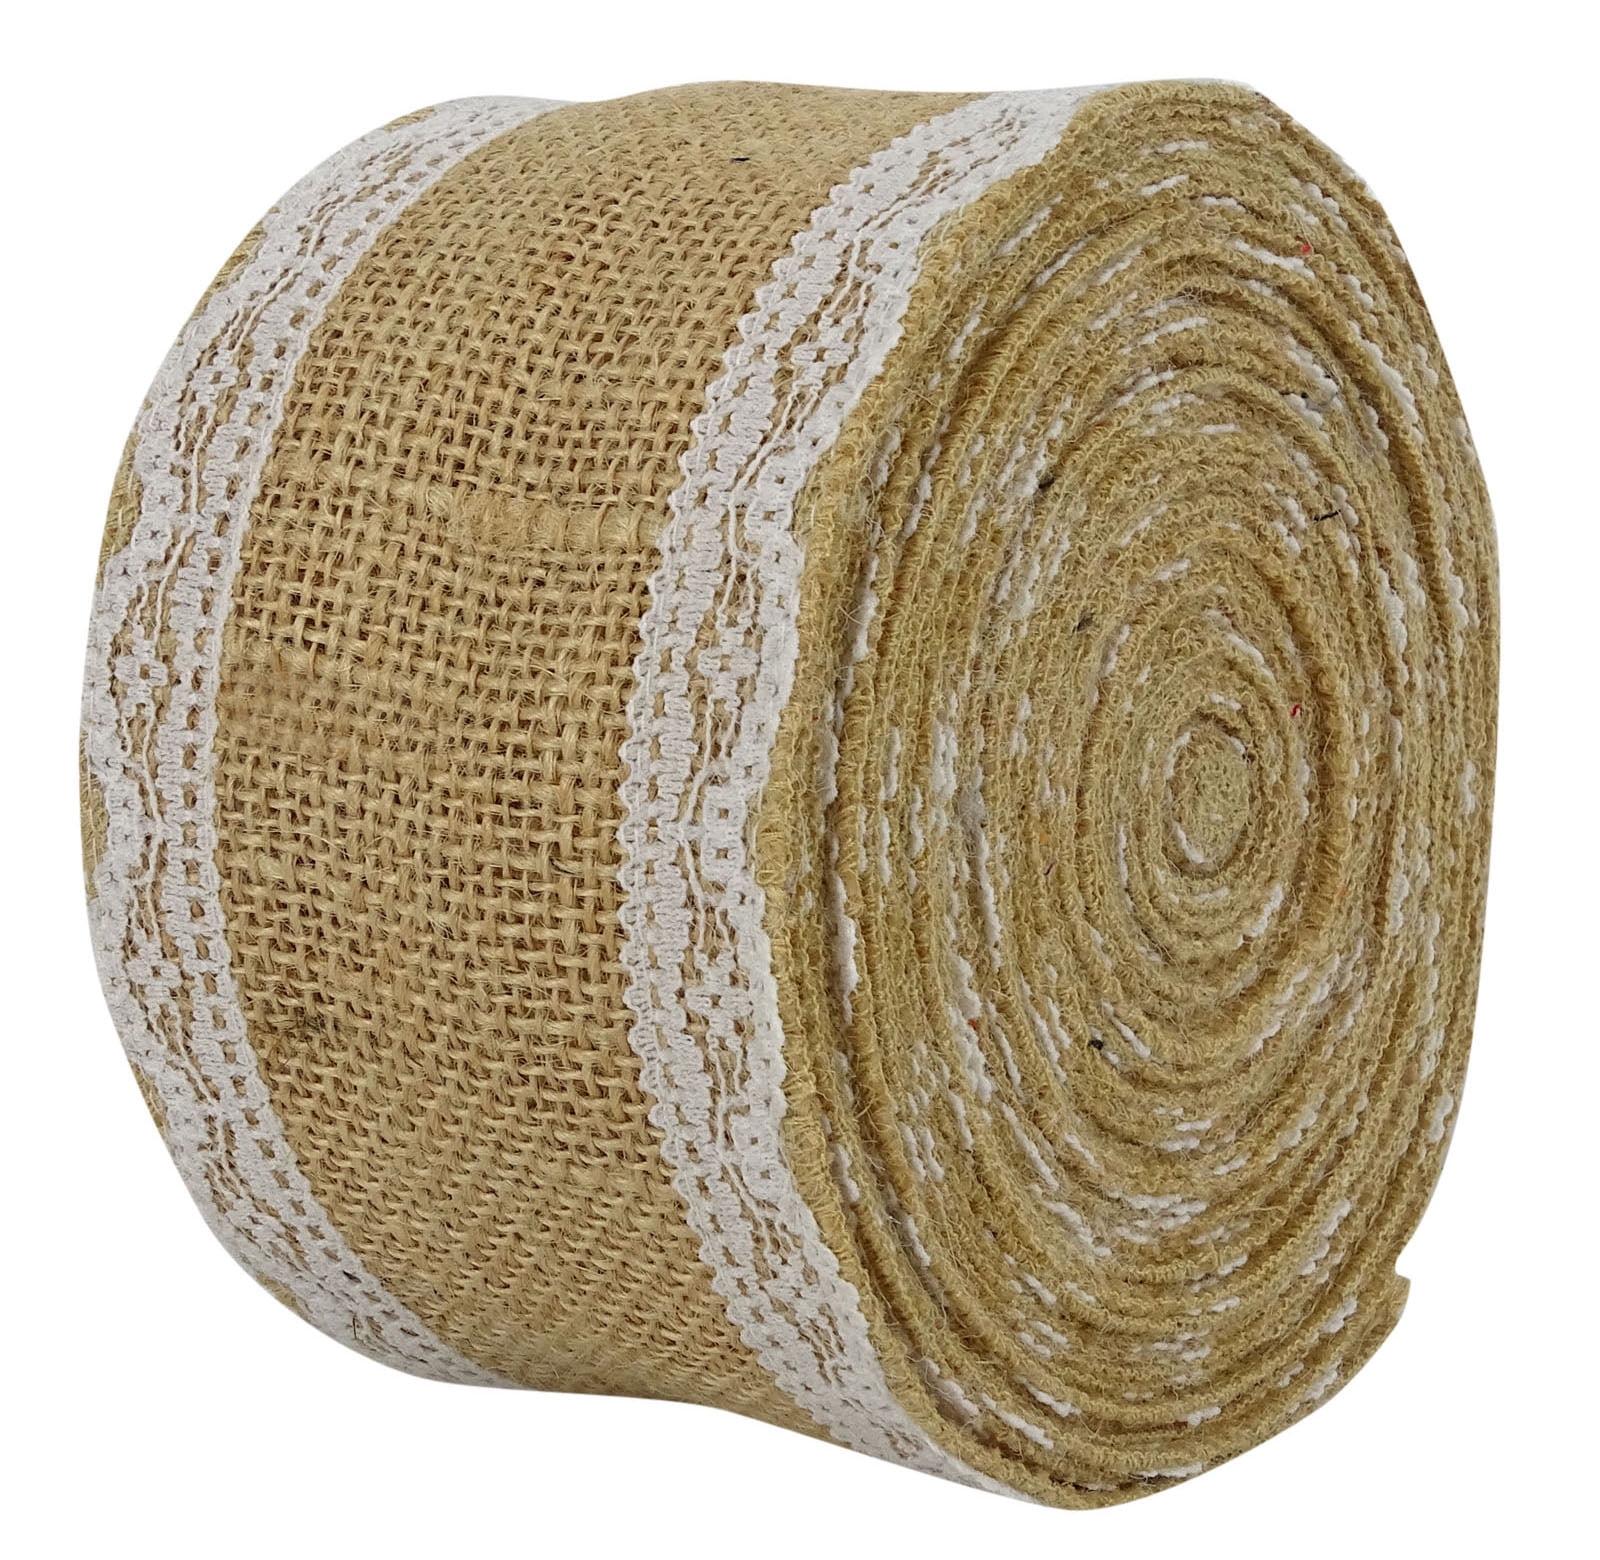 1Roll Jute Ribbon Vintage Lace Edge DIY Gift Wrapping Sewing Crafts Decoration 